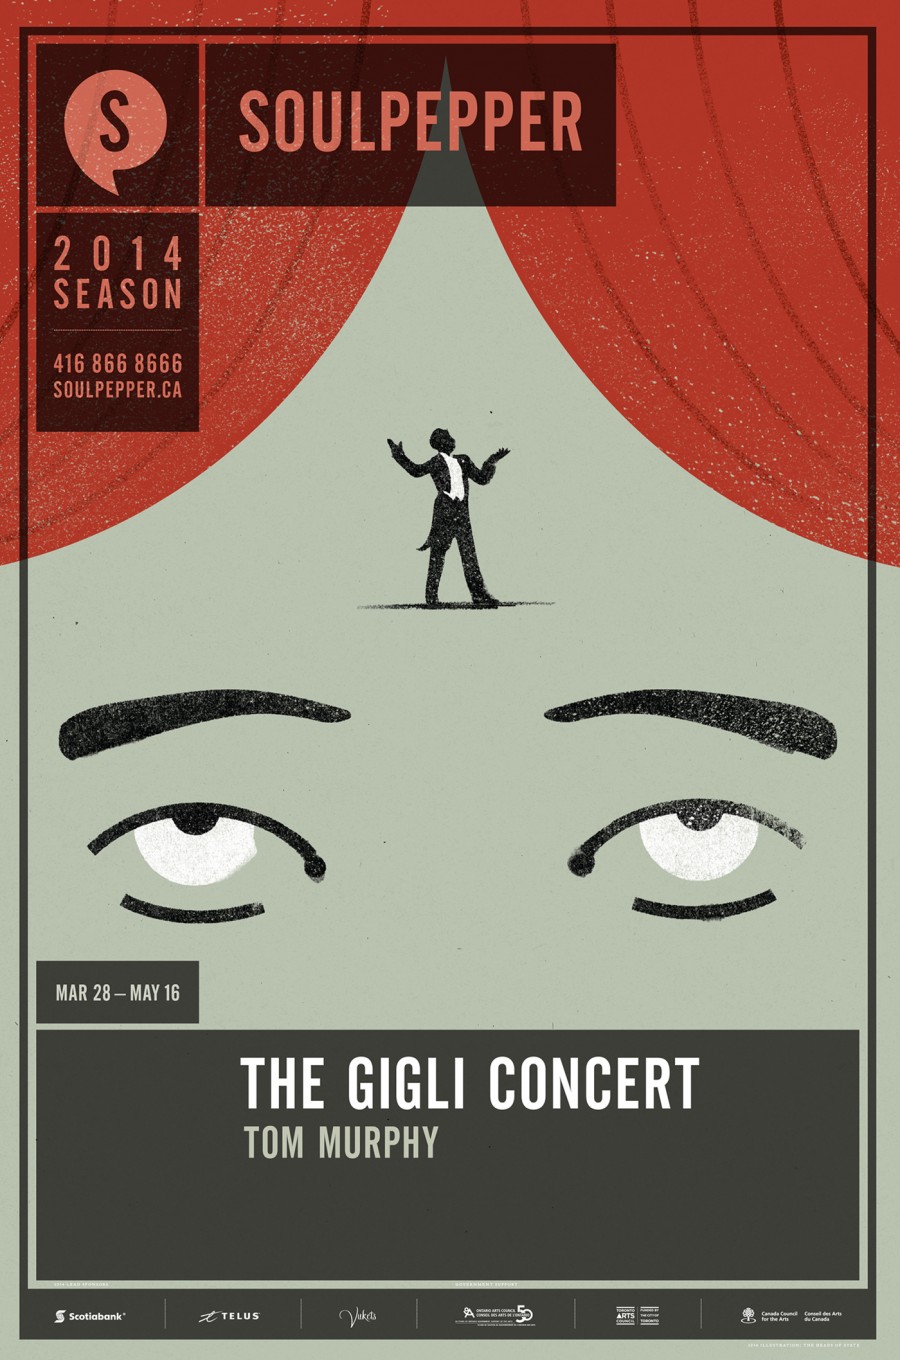 The Gigli Concert - Soulpepper Theatre - 2014 Season Poster Series - The Heads of State